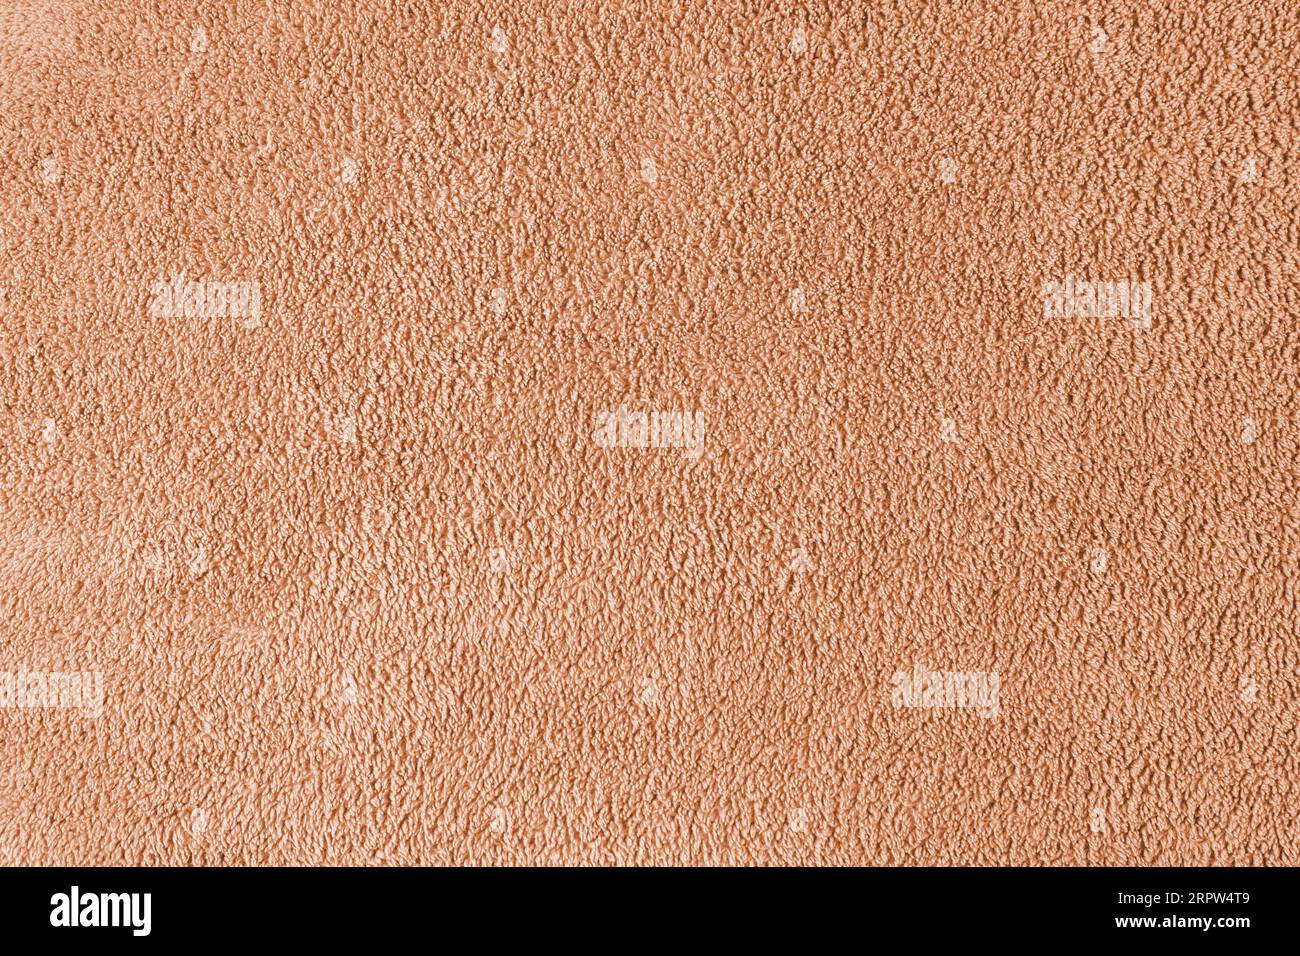 Terry cloth, orange towel texture background. Soft fluffy textile bath or beach towel material. Top view, close up. Stock Photo